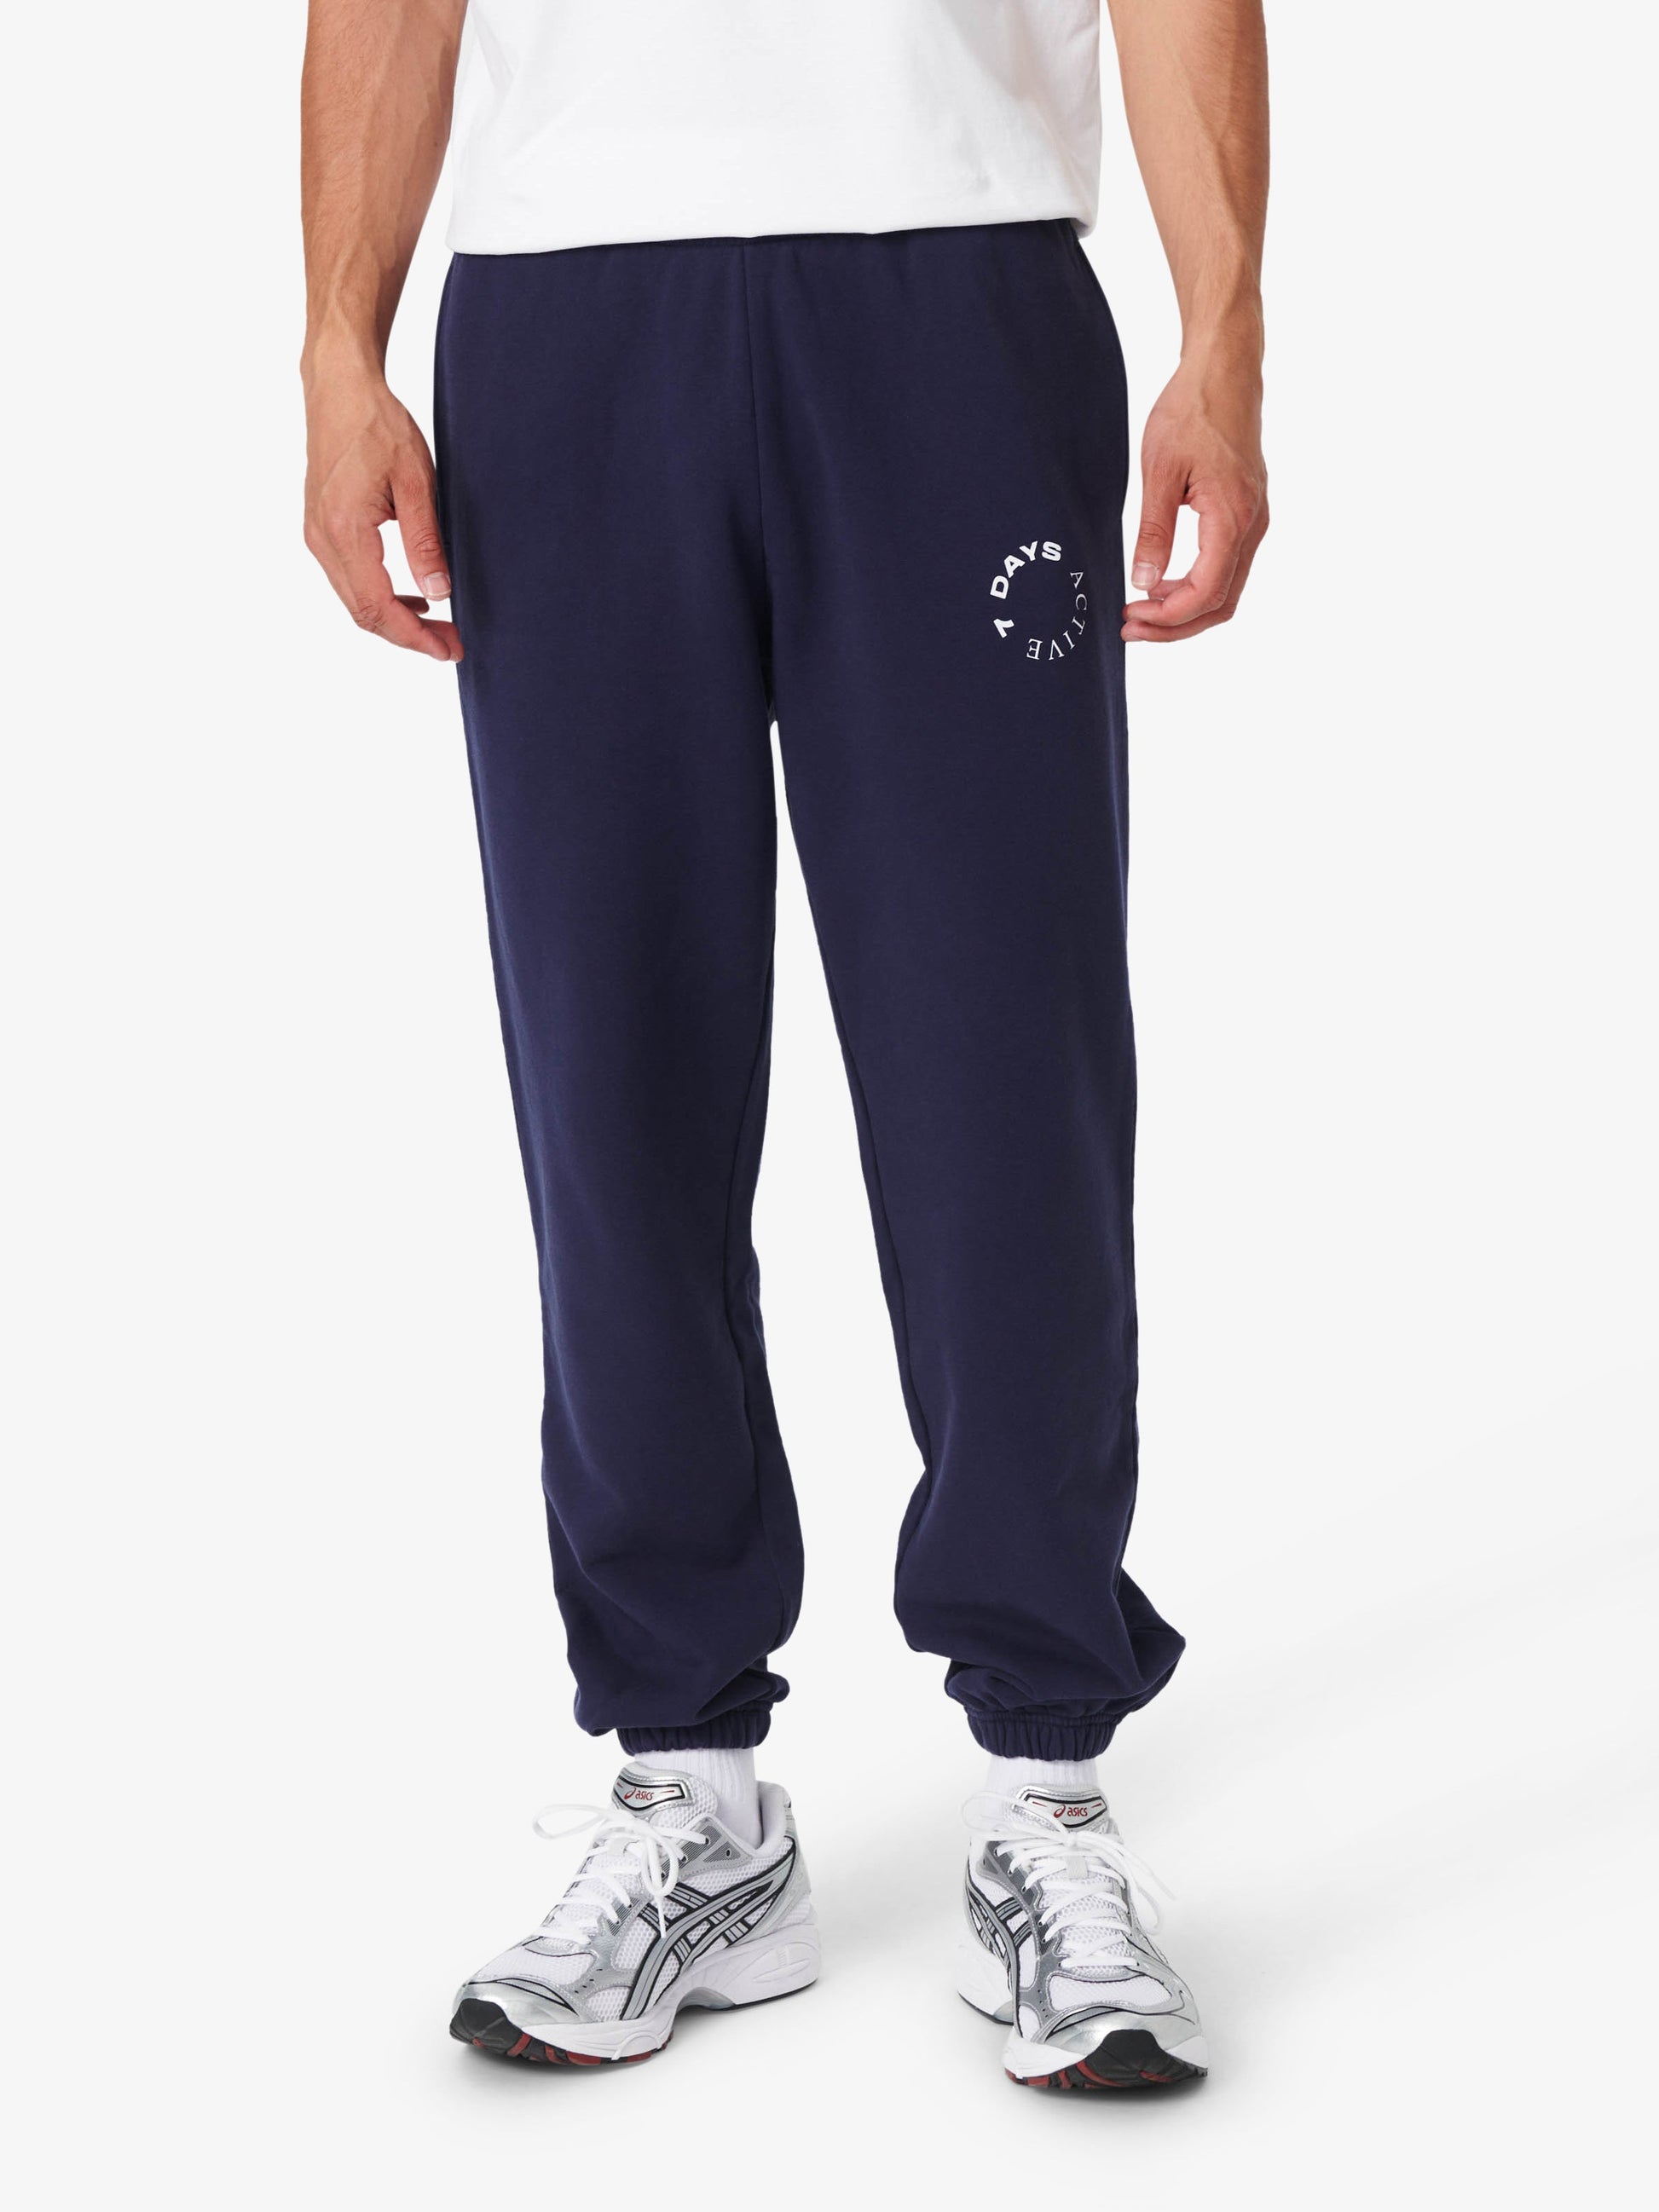 These $6  Sweatpants Are the Best Deal I've Seen All Week